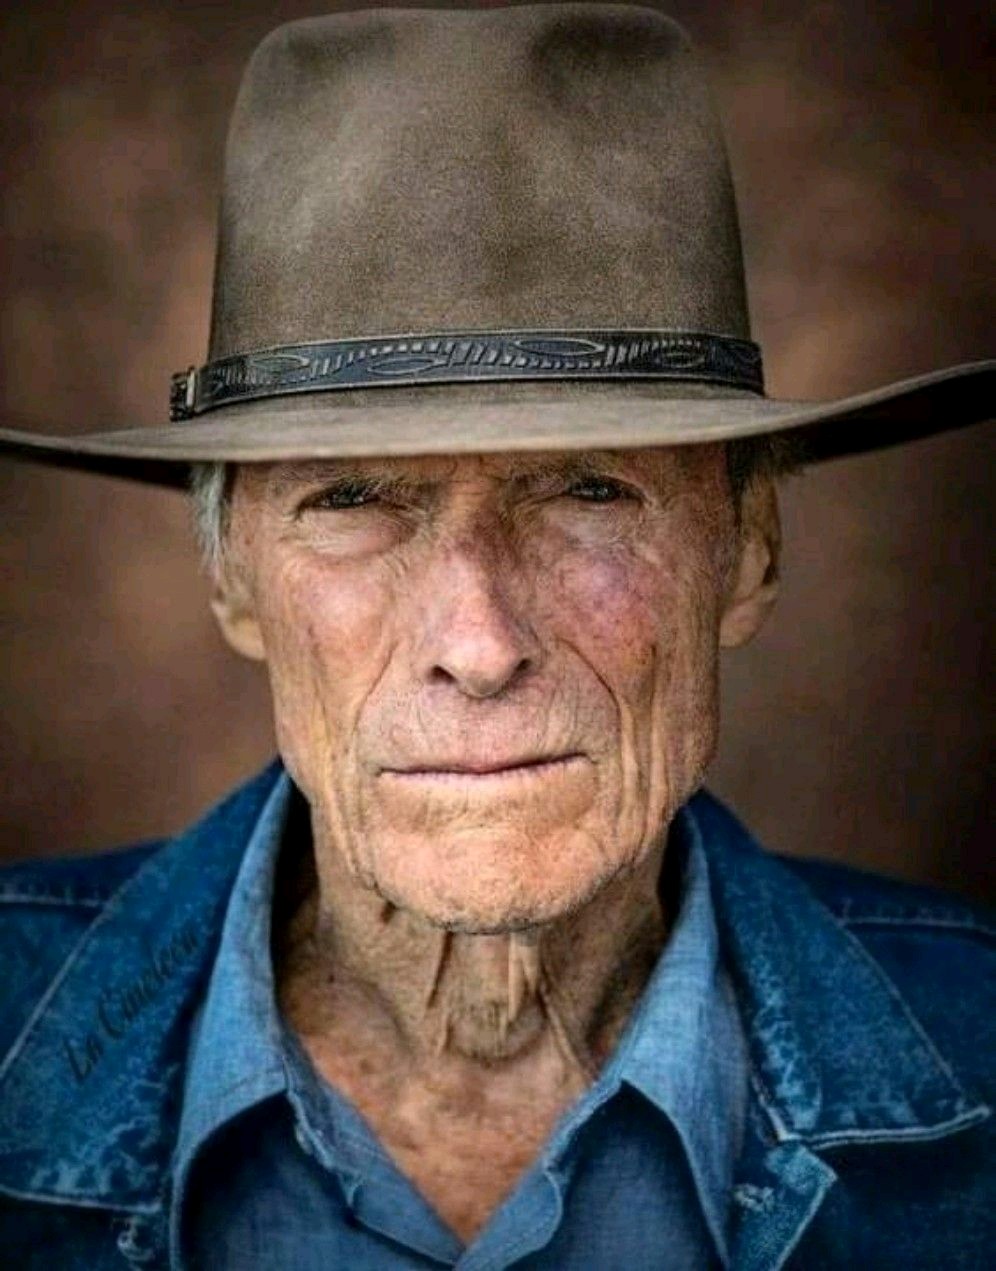 Join me in wishing
Clint Eastwood a
Happy 92nd Birthday 